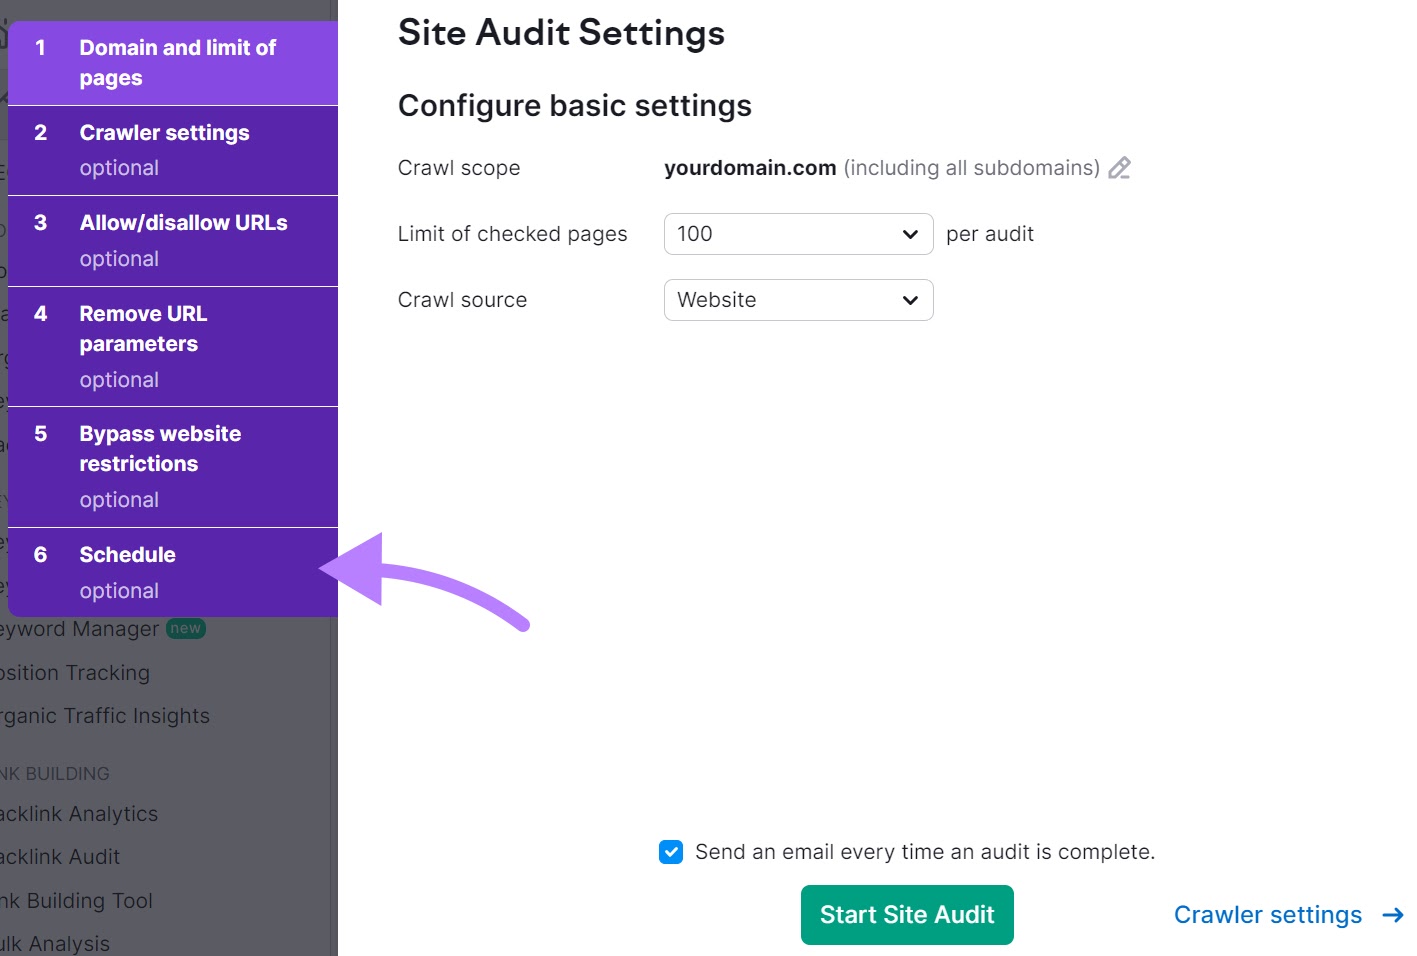 "Schedule" option selected from the Site Audit Settings